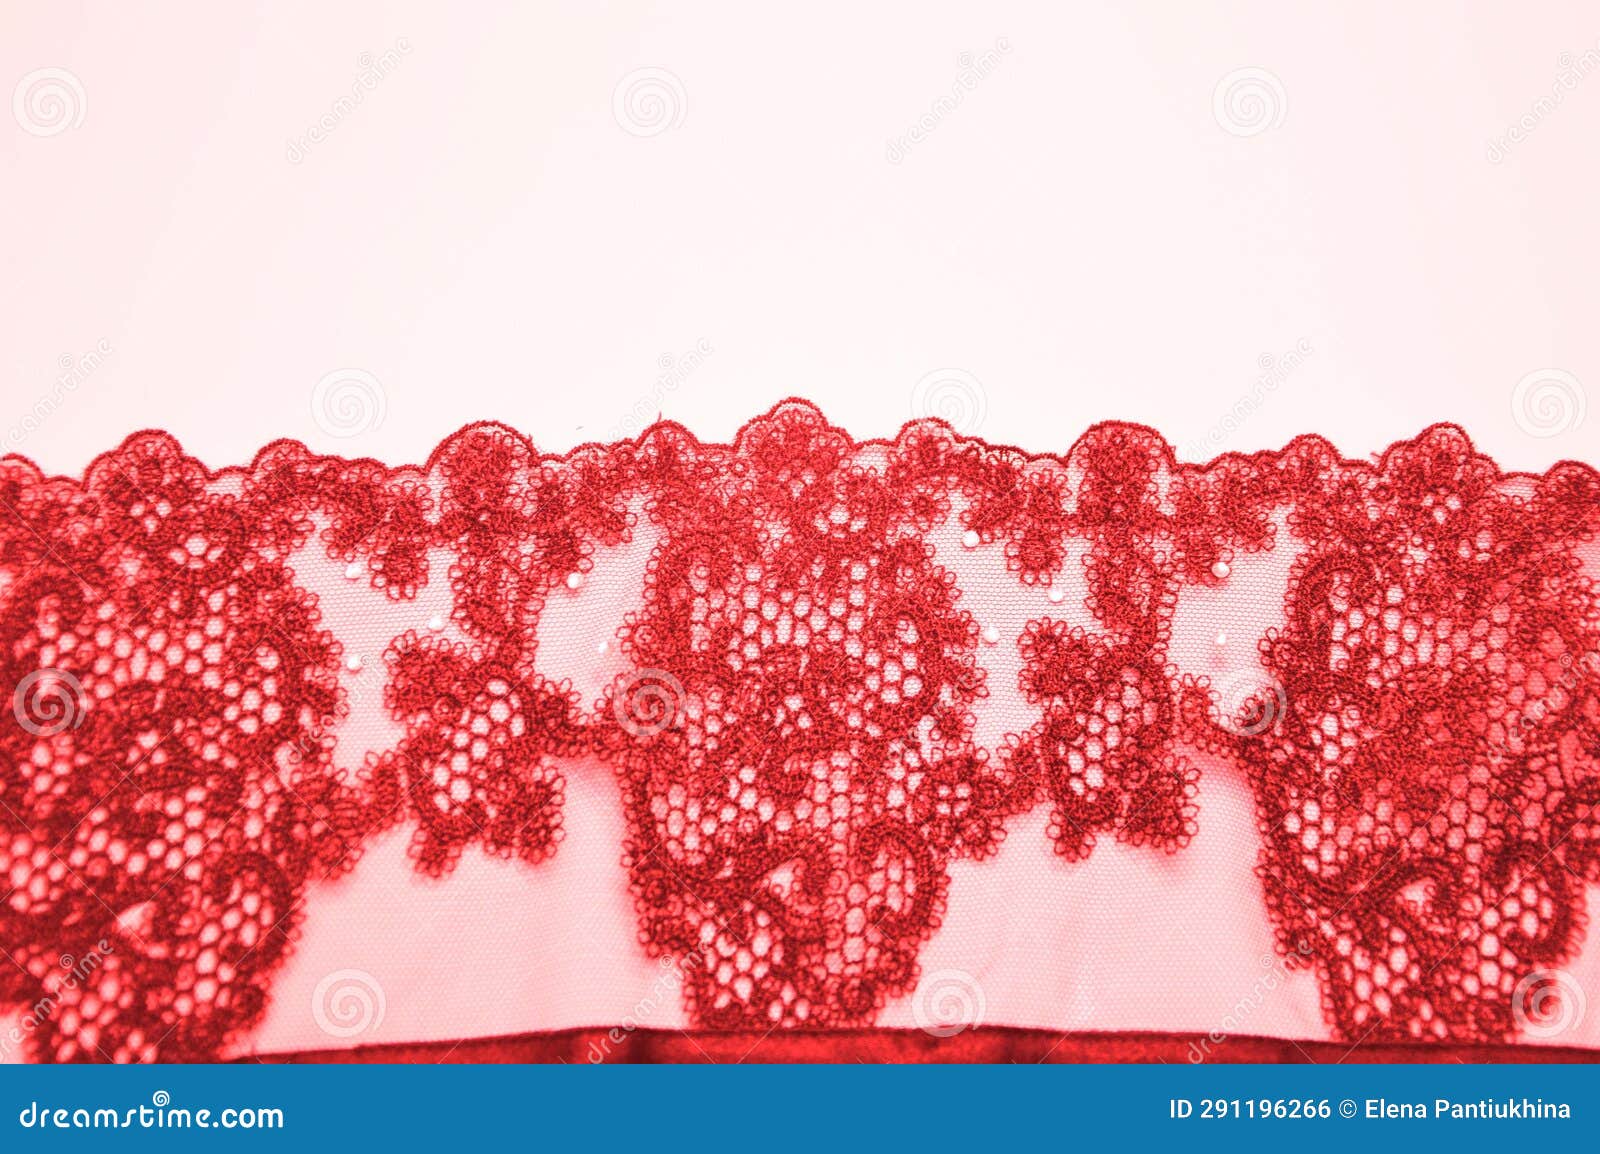 red lace with a beautiful openwork pattern on a white background. finishing  for lingerie, clothing